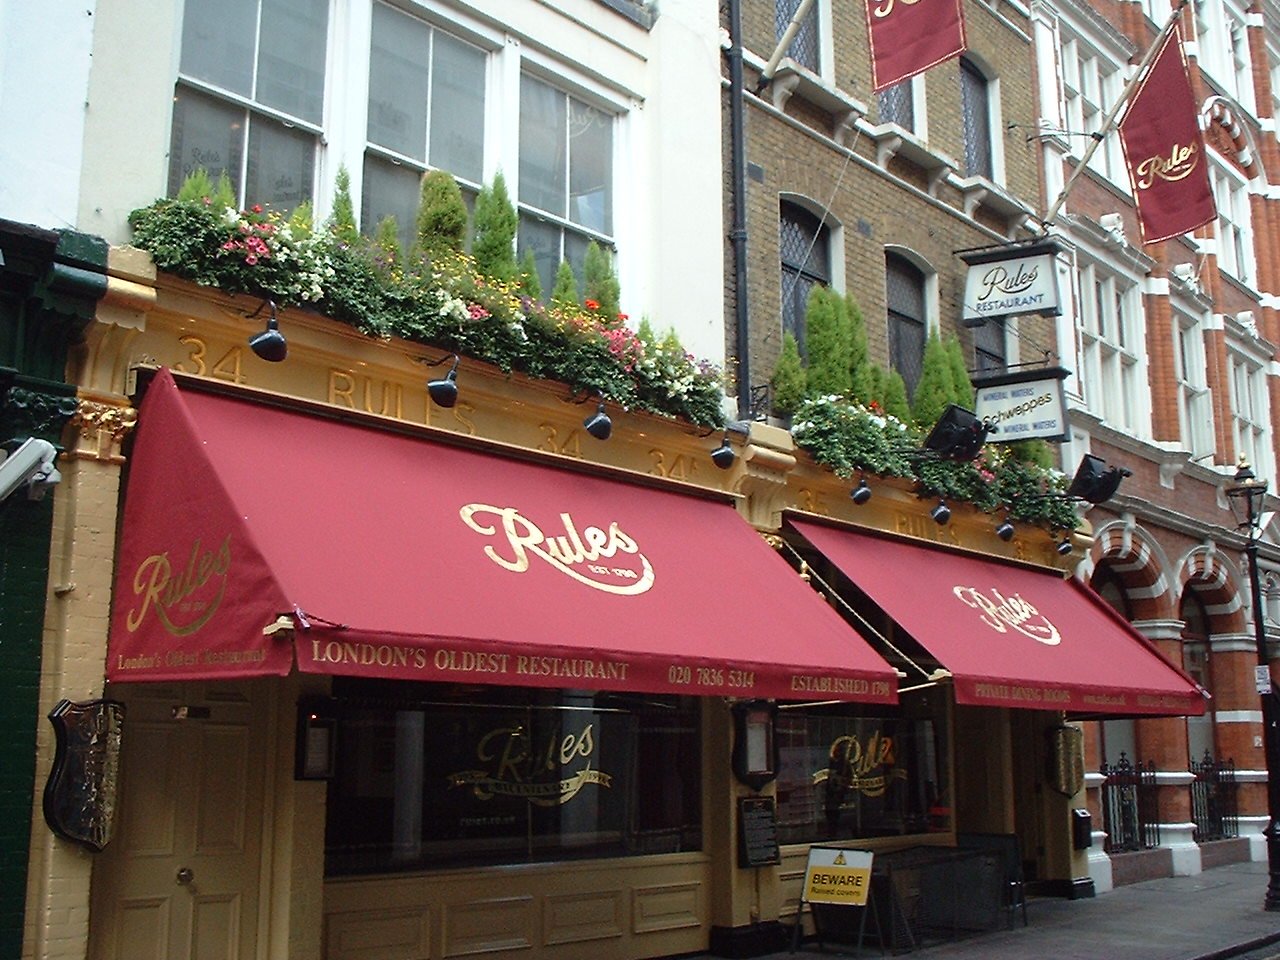 awnings gold leaf